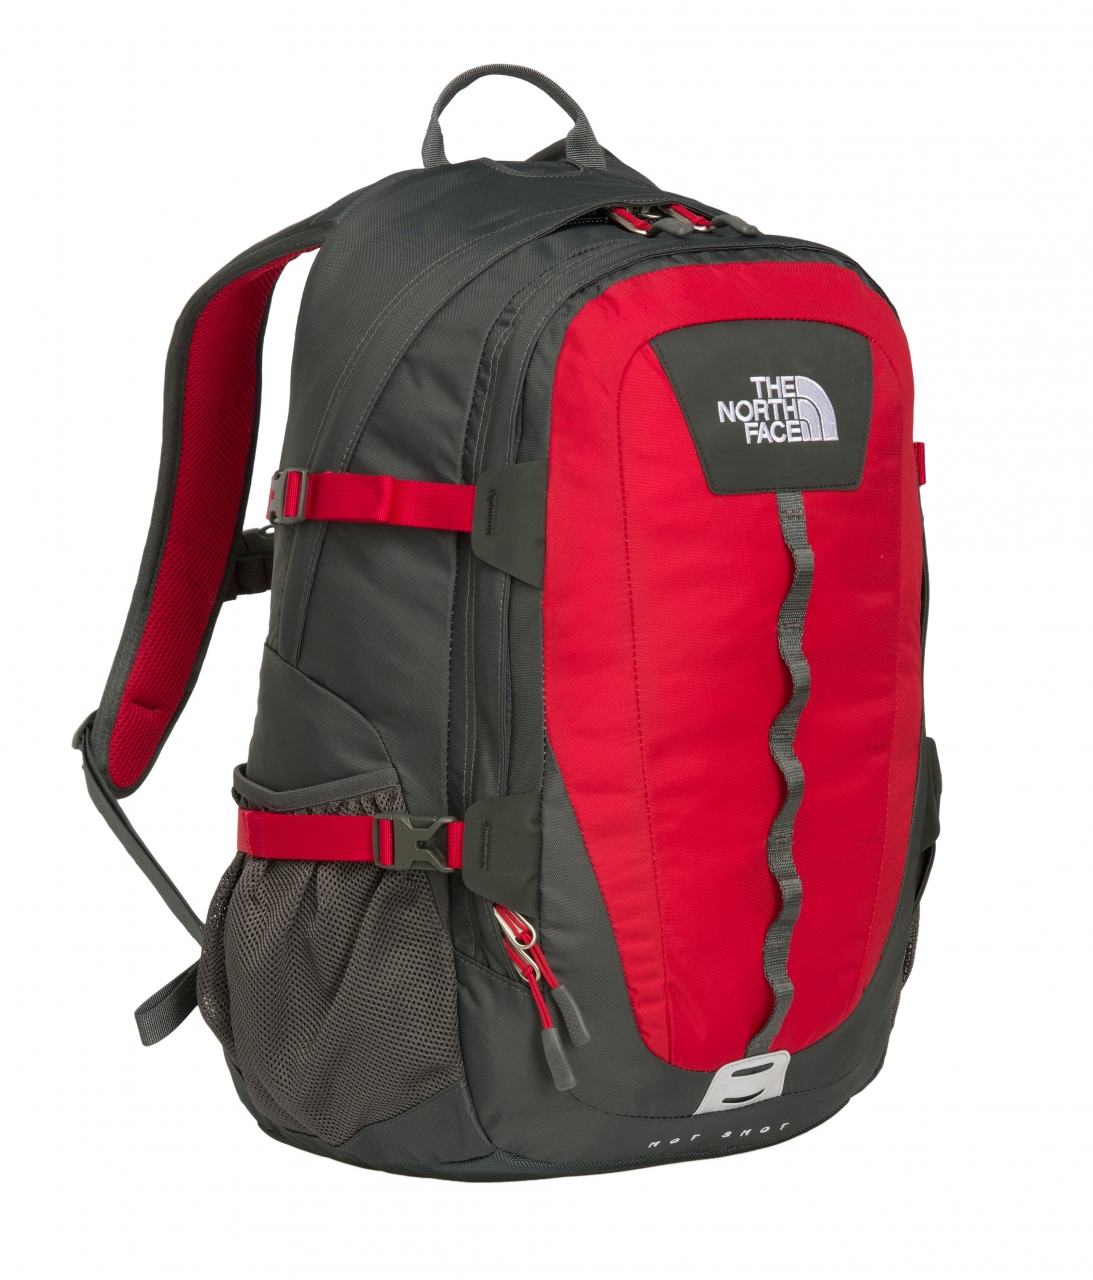 The North Face Hot Shot Rugzak Rood